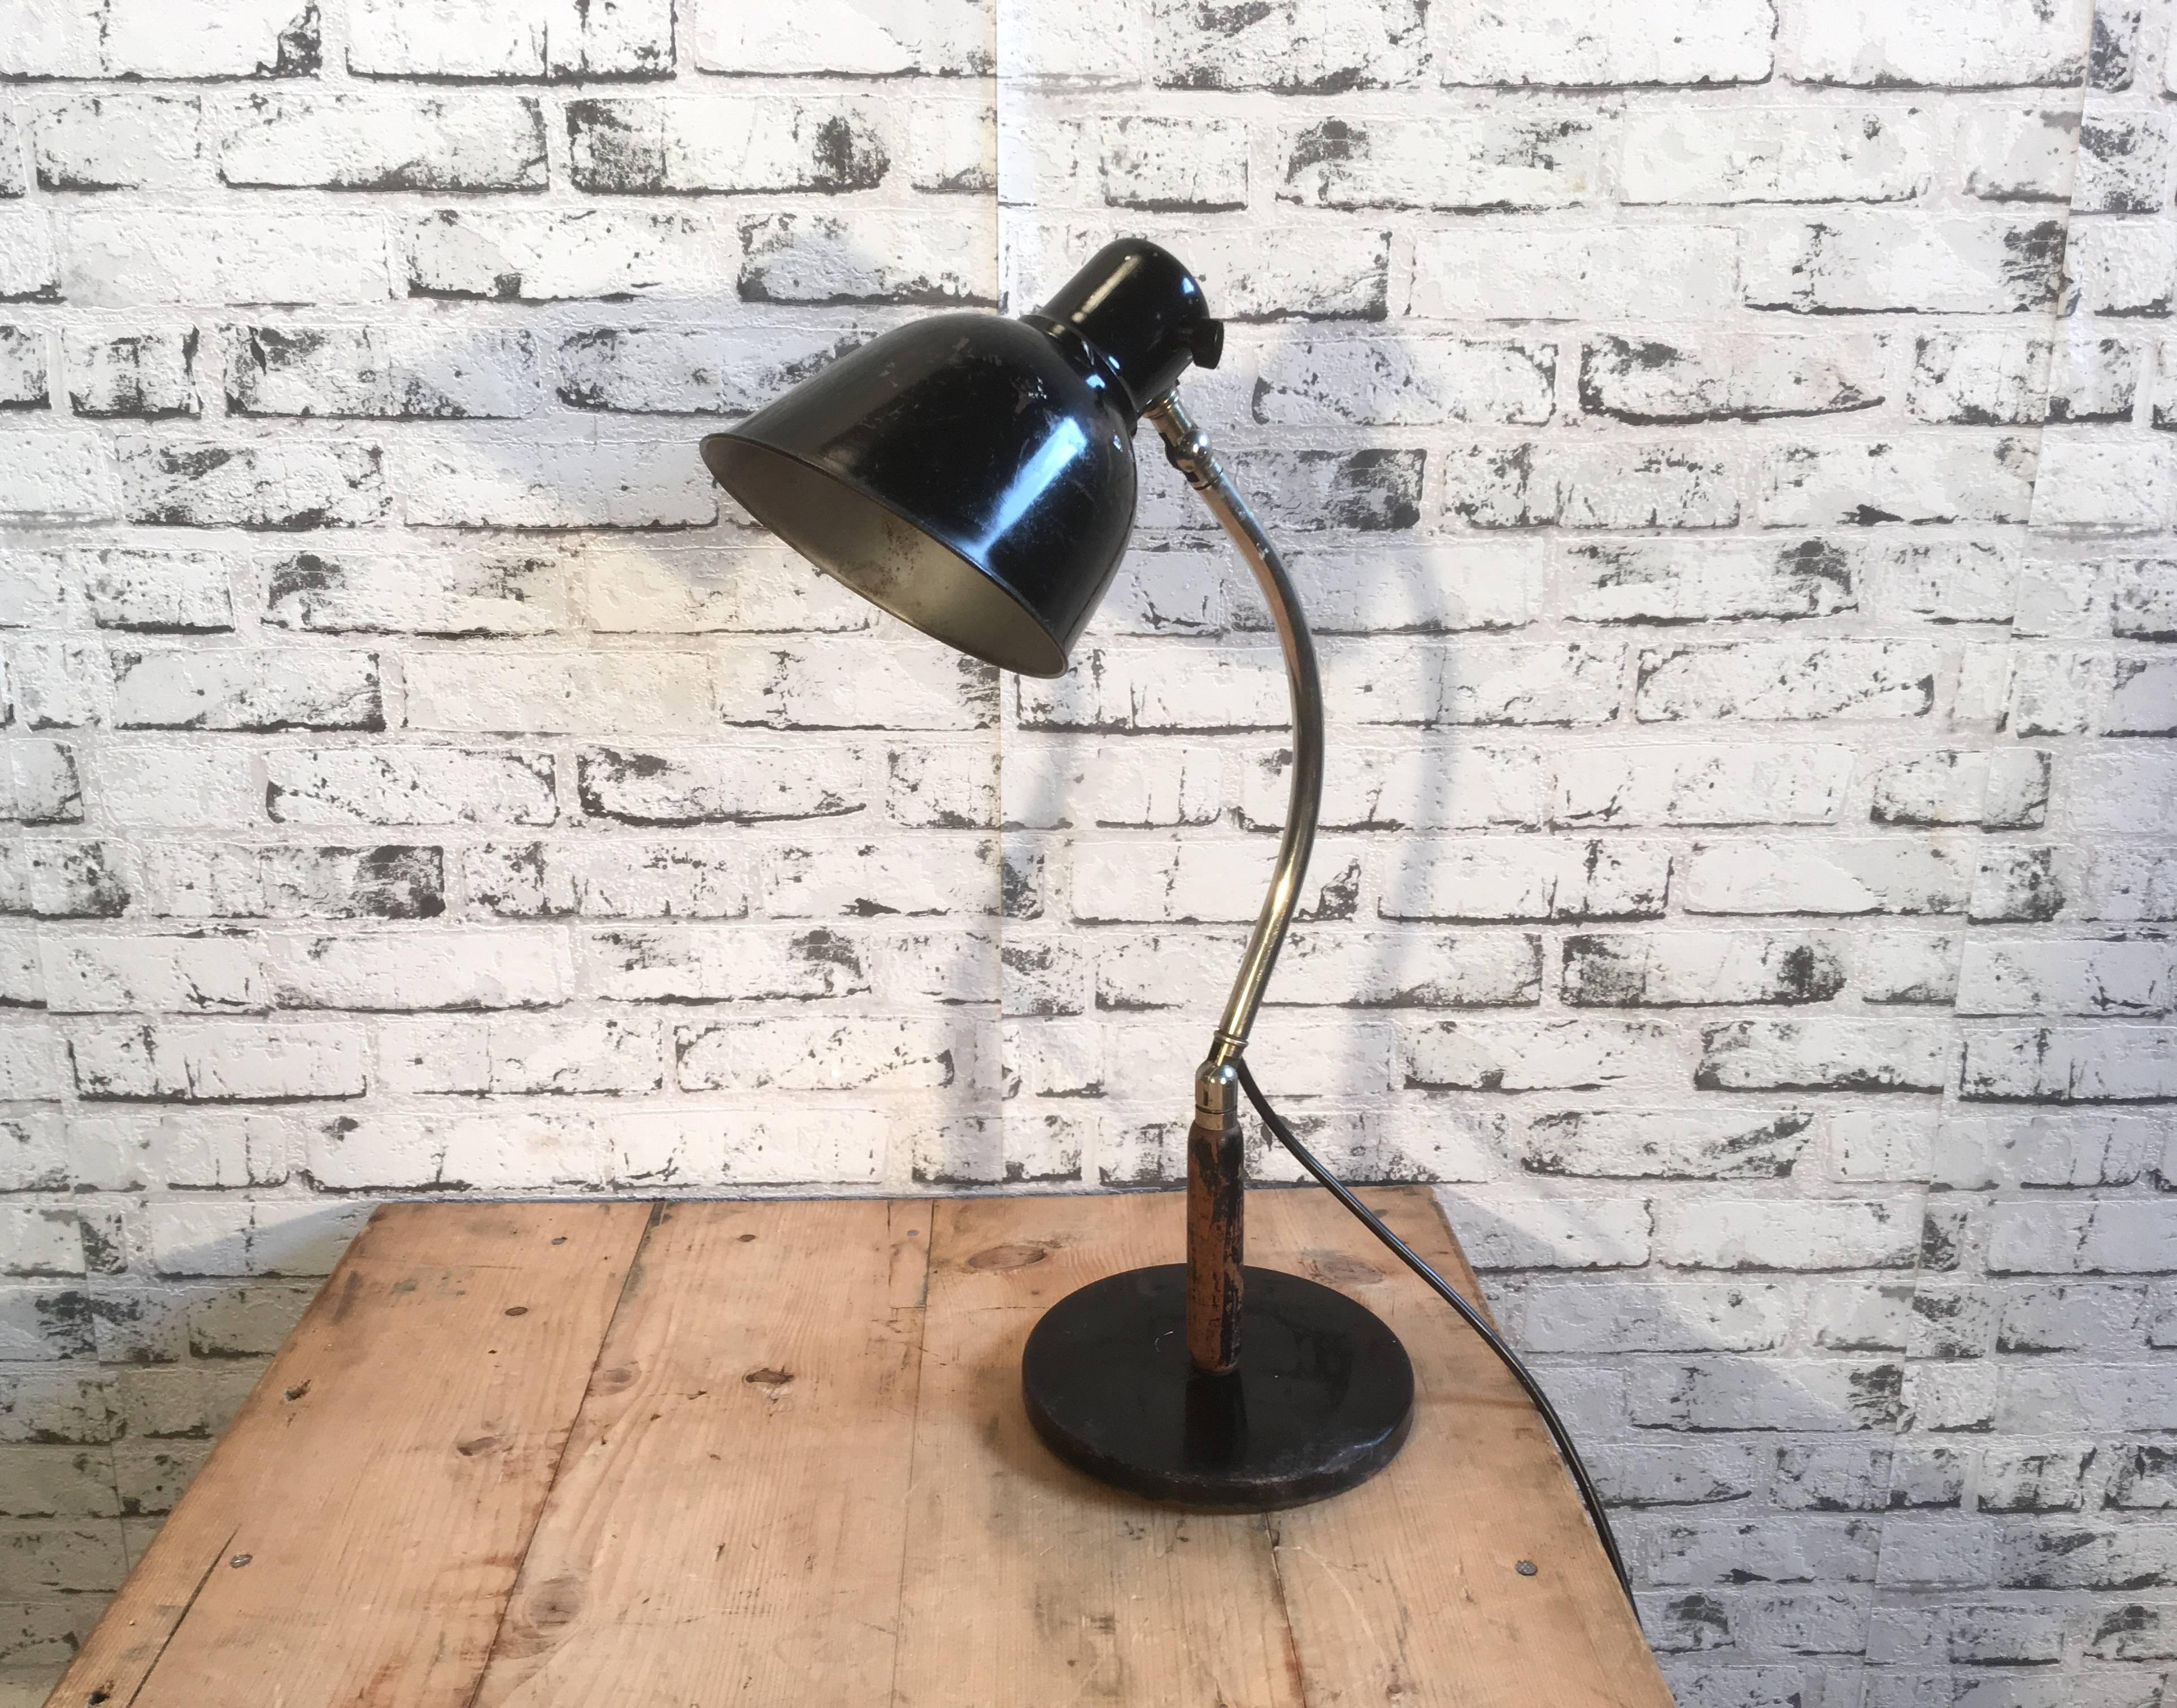 Black metal and wood industrial table lamp with two adjustable joints. Switch is located directly on the lampshade. Lamp is fully functional and in good vintage condition.
Measures: Width 19.0 cm
Height 50.0 cm
Other diameter 16 cm.